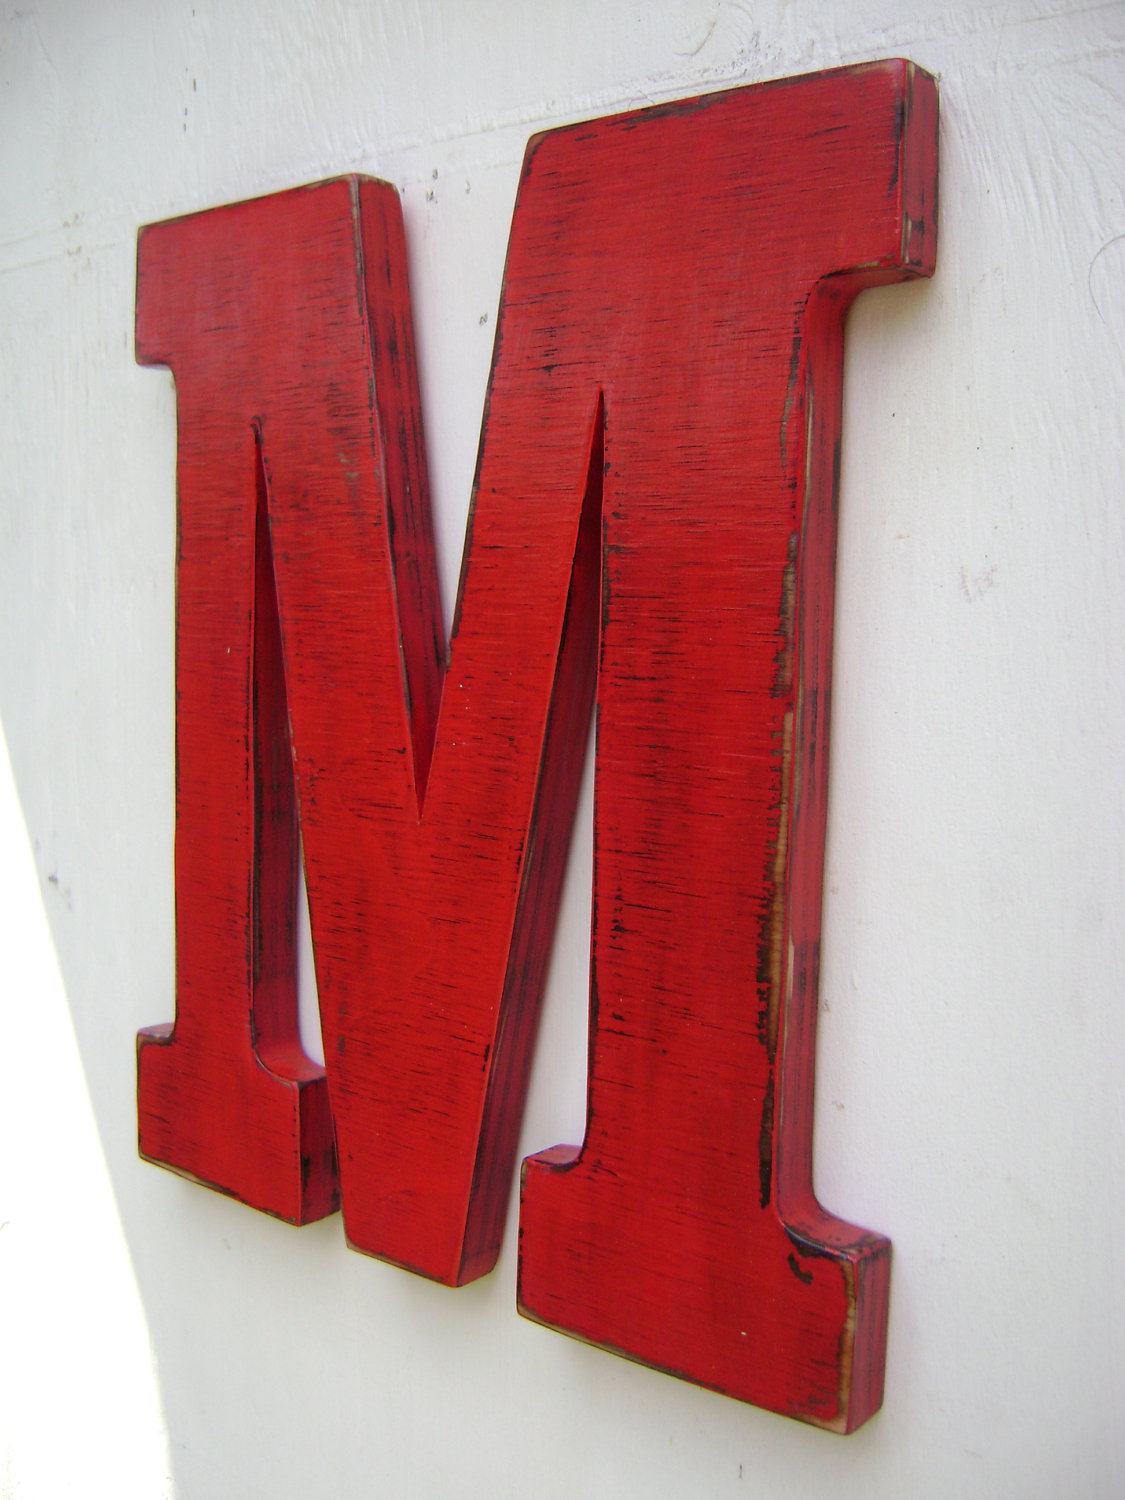 shabby-chic-wedding-decor-m-hanging-wood-letters-nursery-letters-12